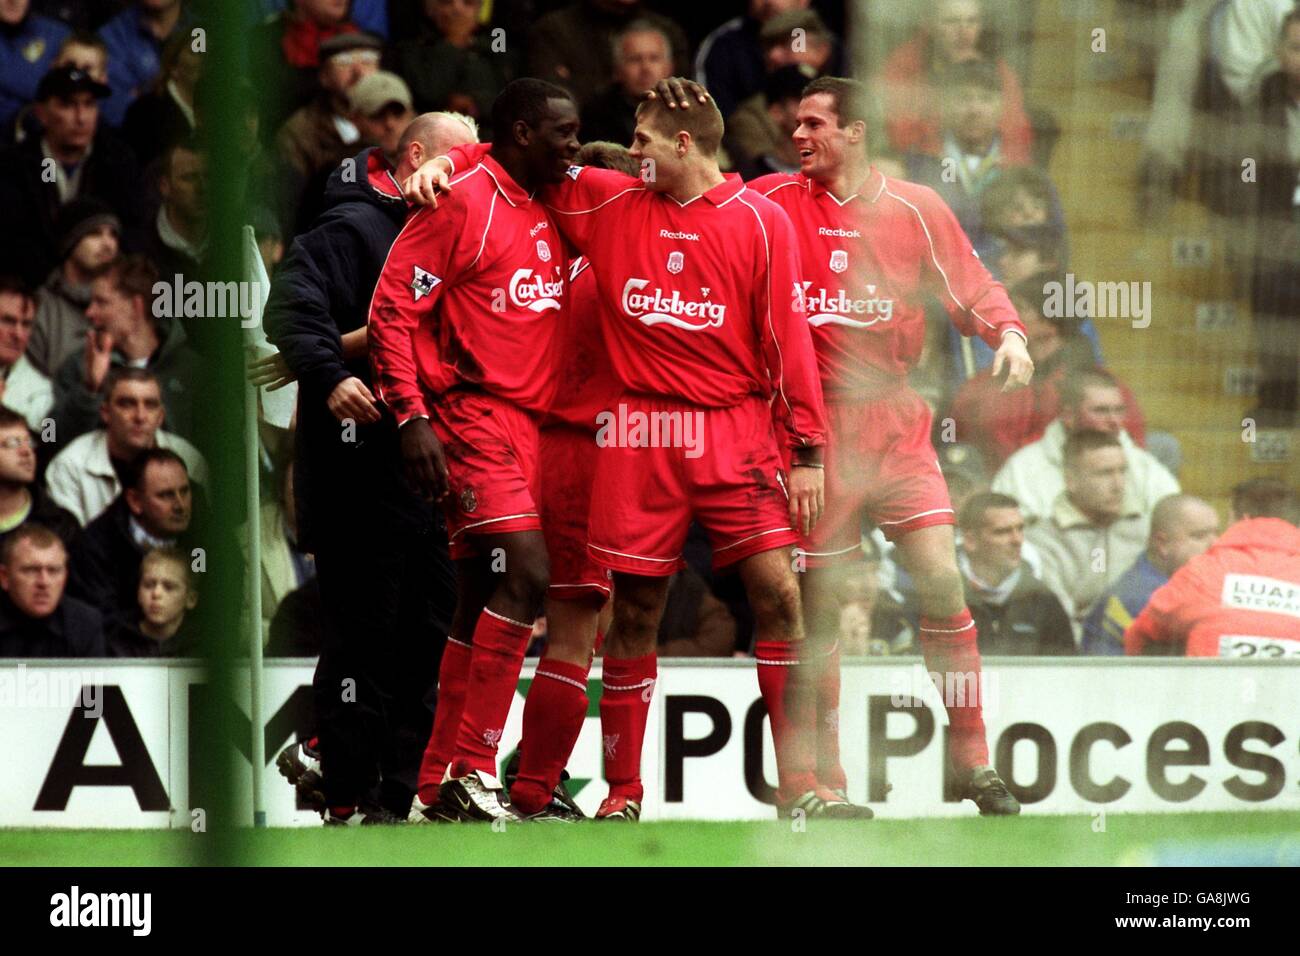 Liverpool's Emile Heskey (l) is congratulated on scoring by teammates Steven Gerrard (c) and Jamie Carragher (r) Stock Photo